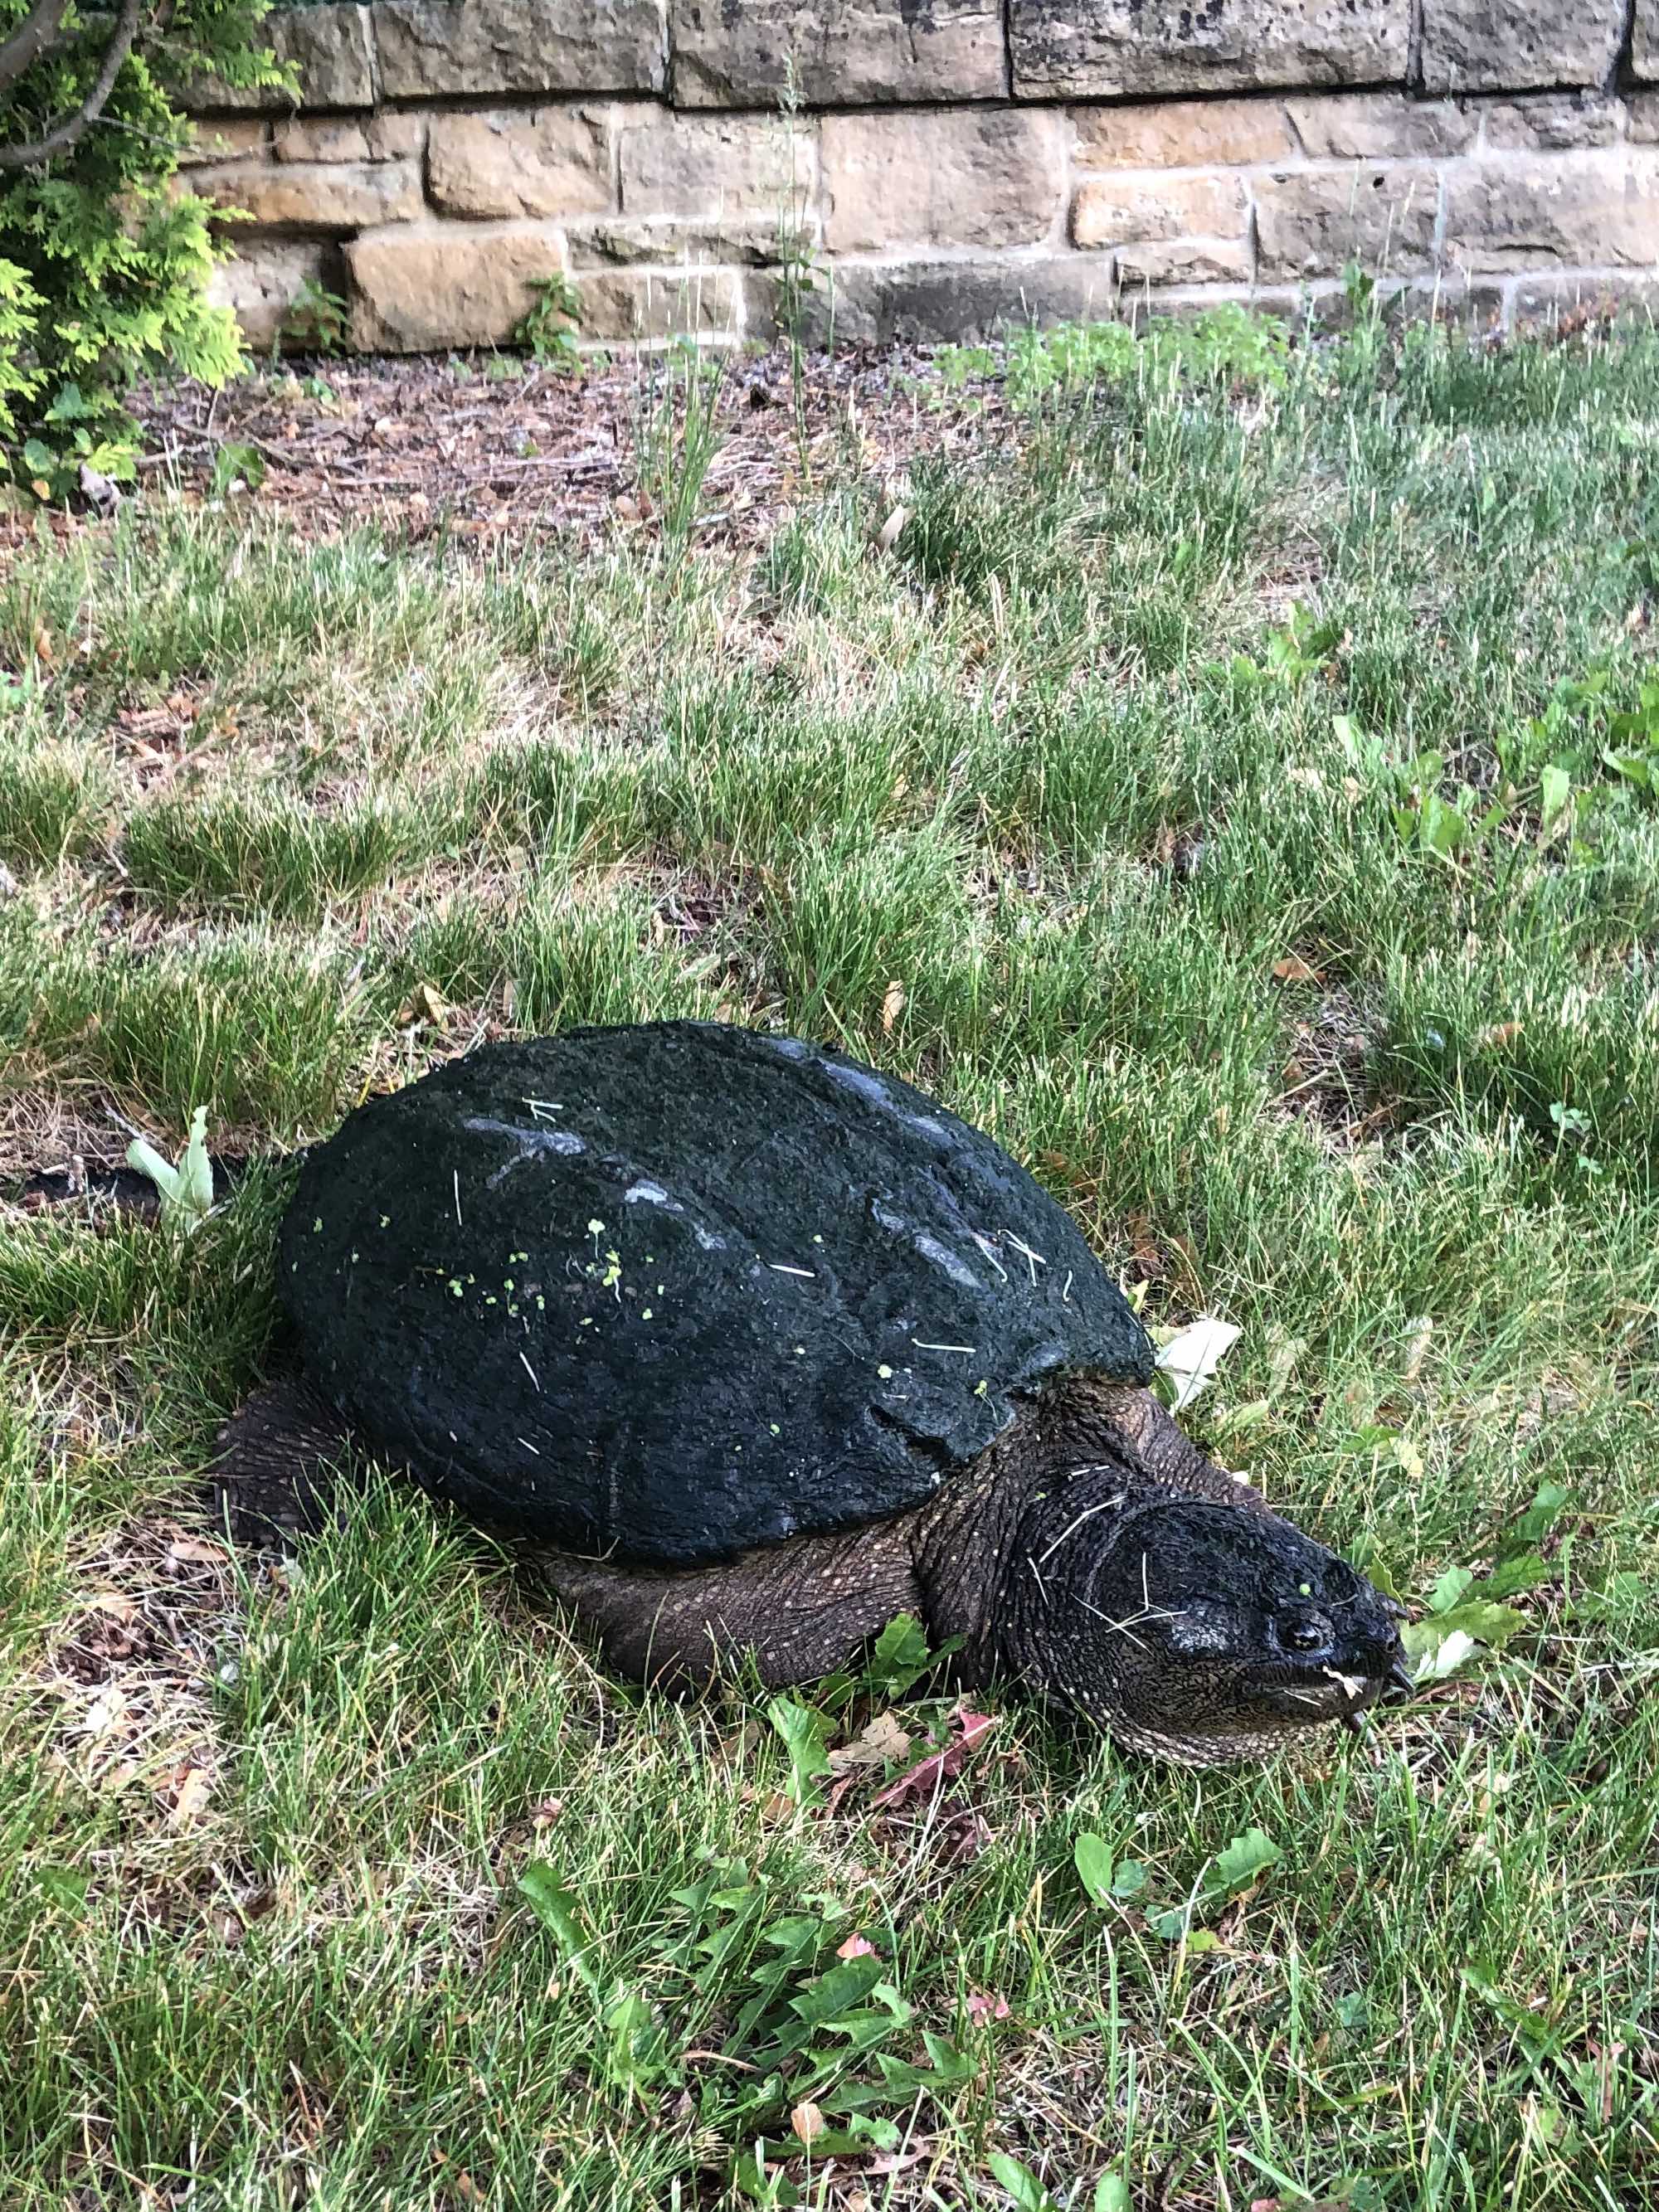 Snapping Turtle in E. Ray Stevens Pond and Aquatic Gardens on corner of Manitou Way and Nakoma Road in Madison, Wisconsin on June 68, 2021.